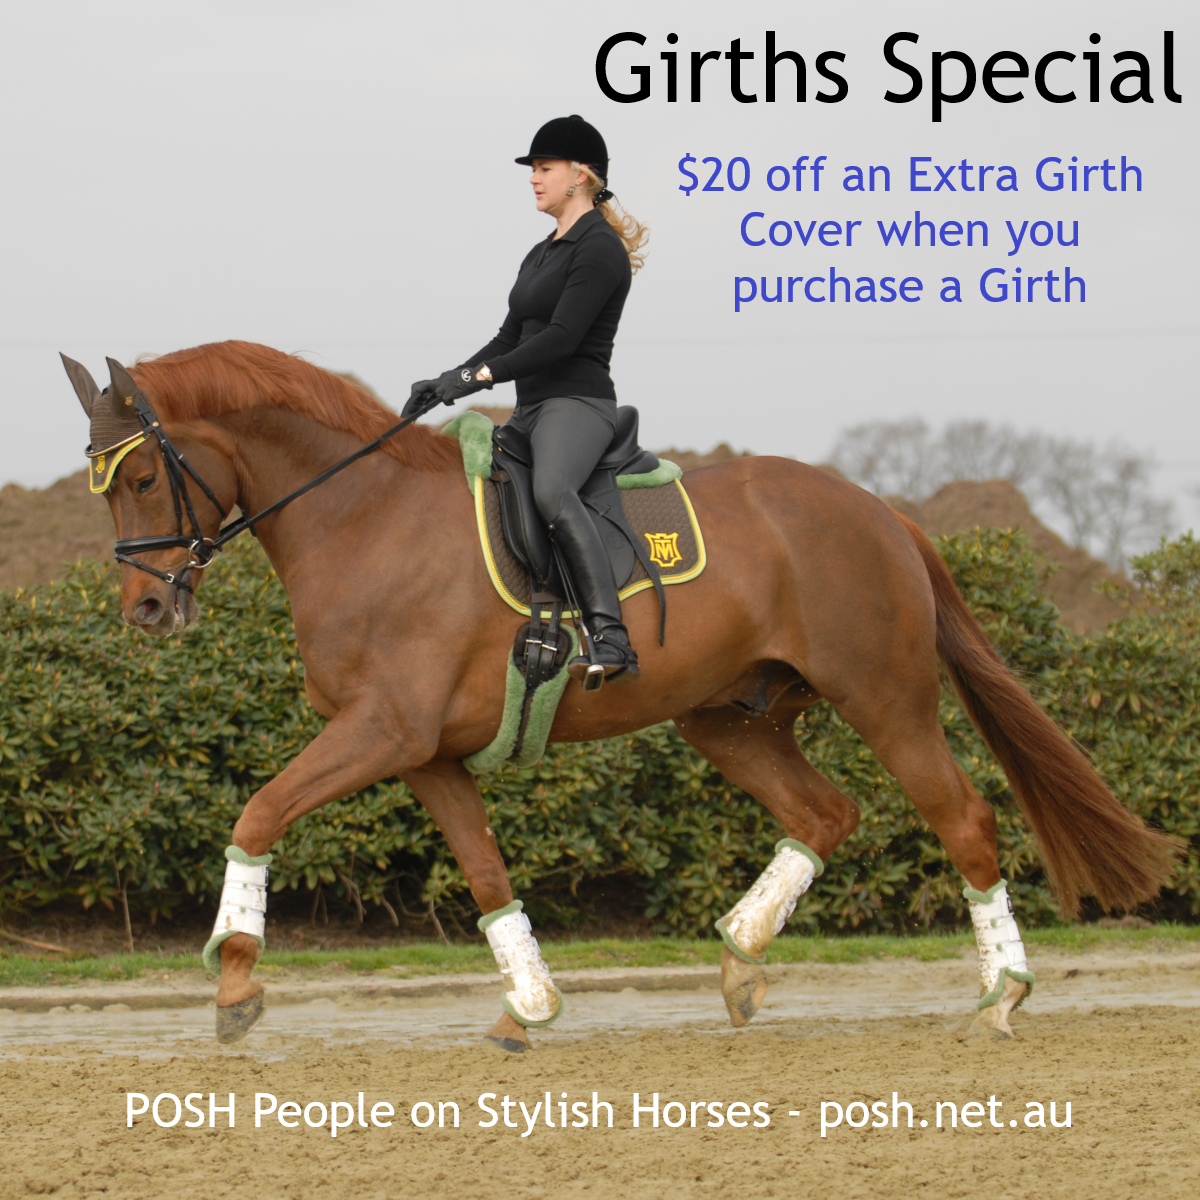 Girth Cover Special